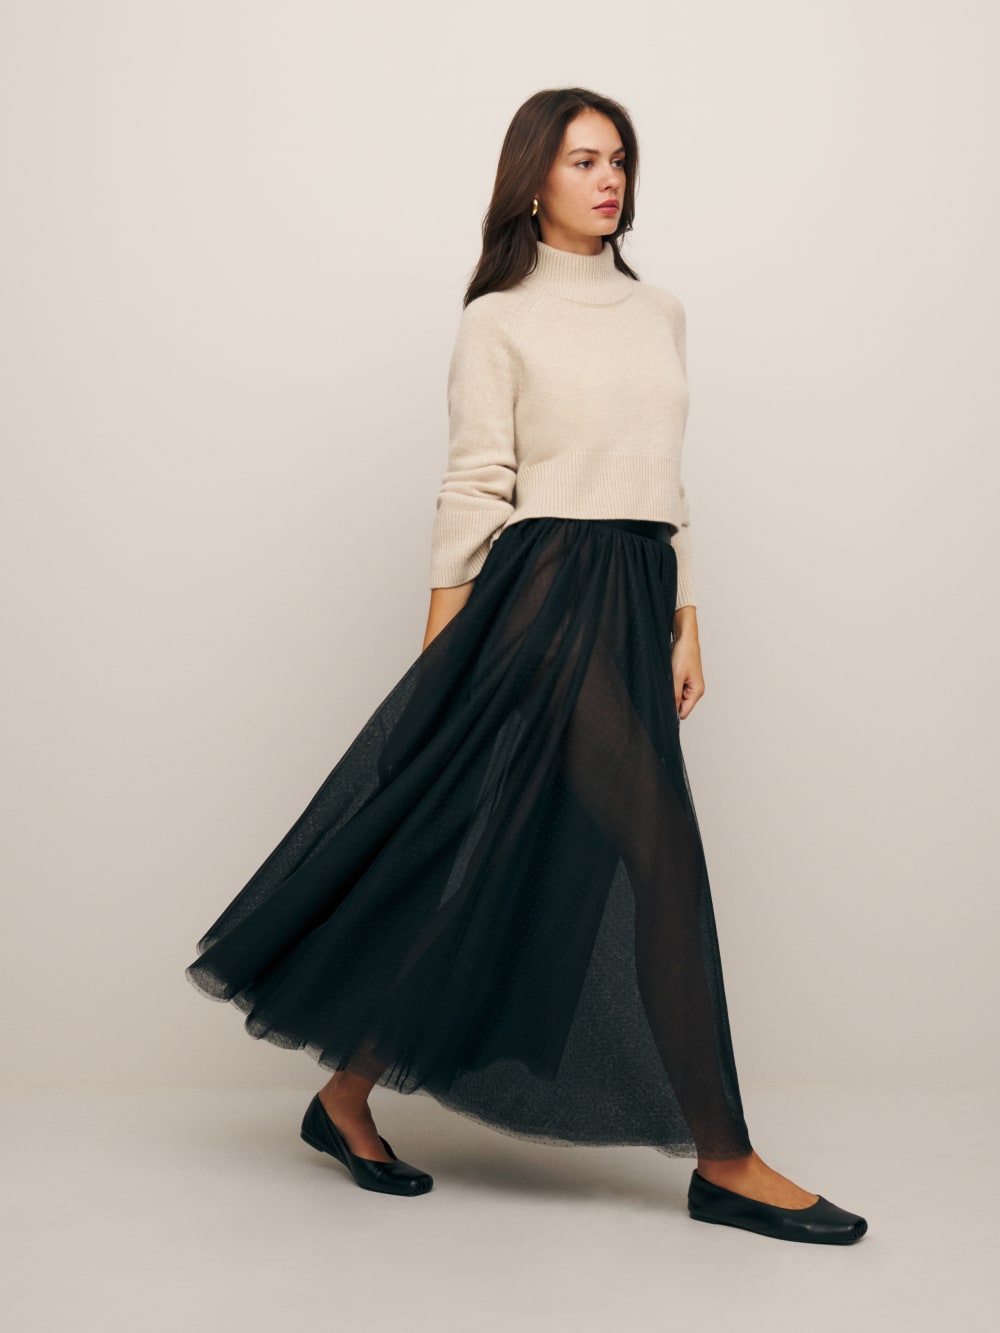 You Will Want to See These Skirt Trends to Try in 2023 (& 2024!)